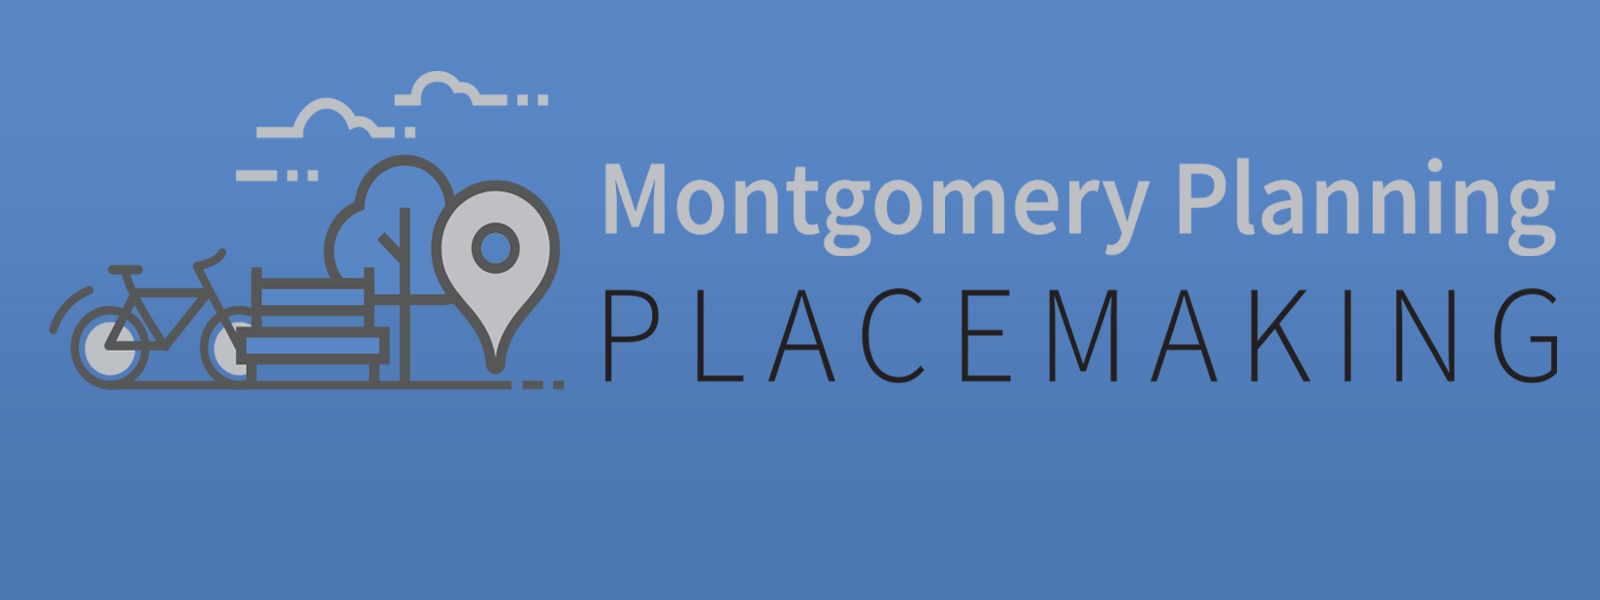 montgomery planning placemaking